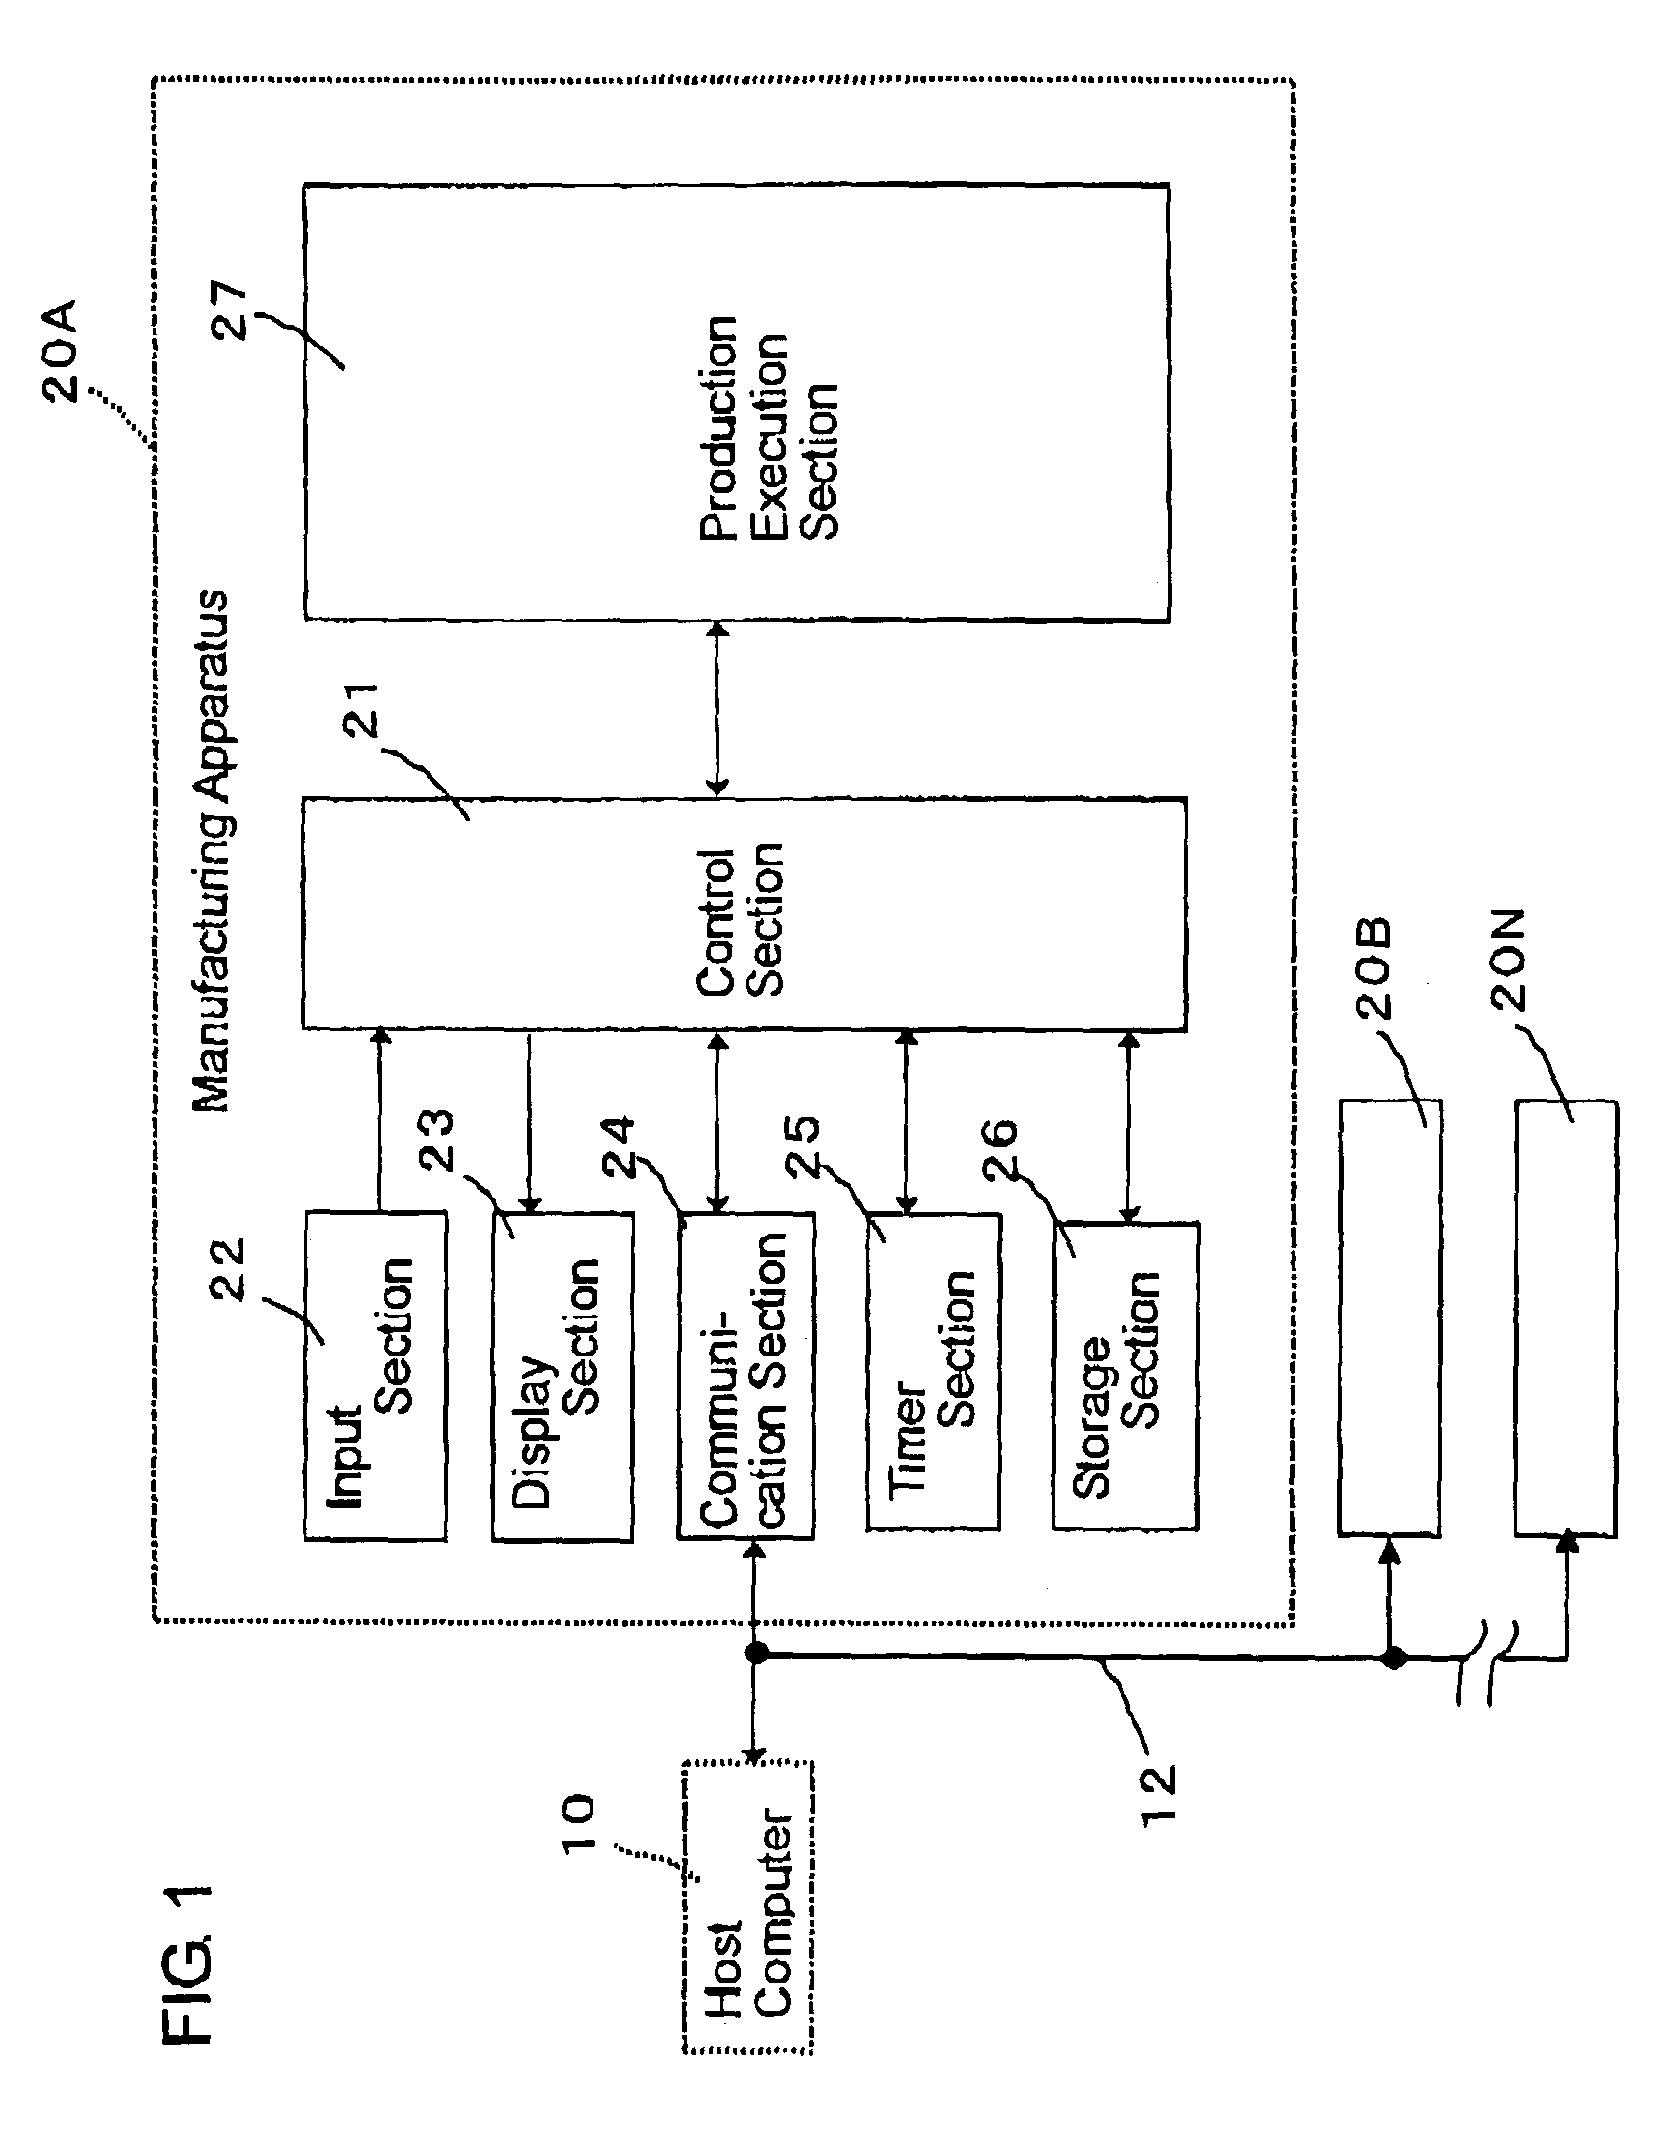 Circuit board manufacturing apparatus with protection function for supervising/adjusting mode and method of operating the apparatus